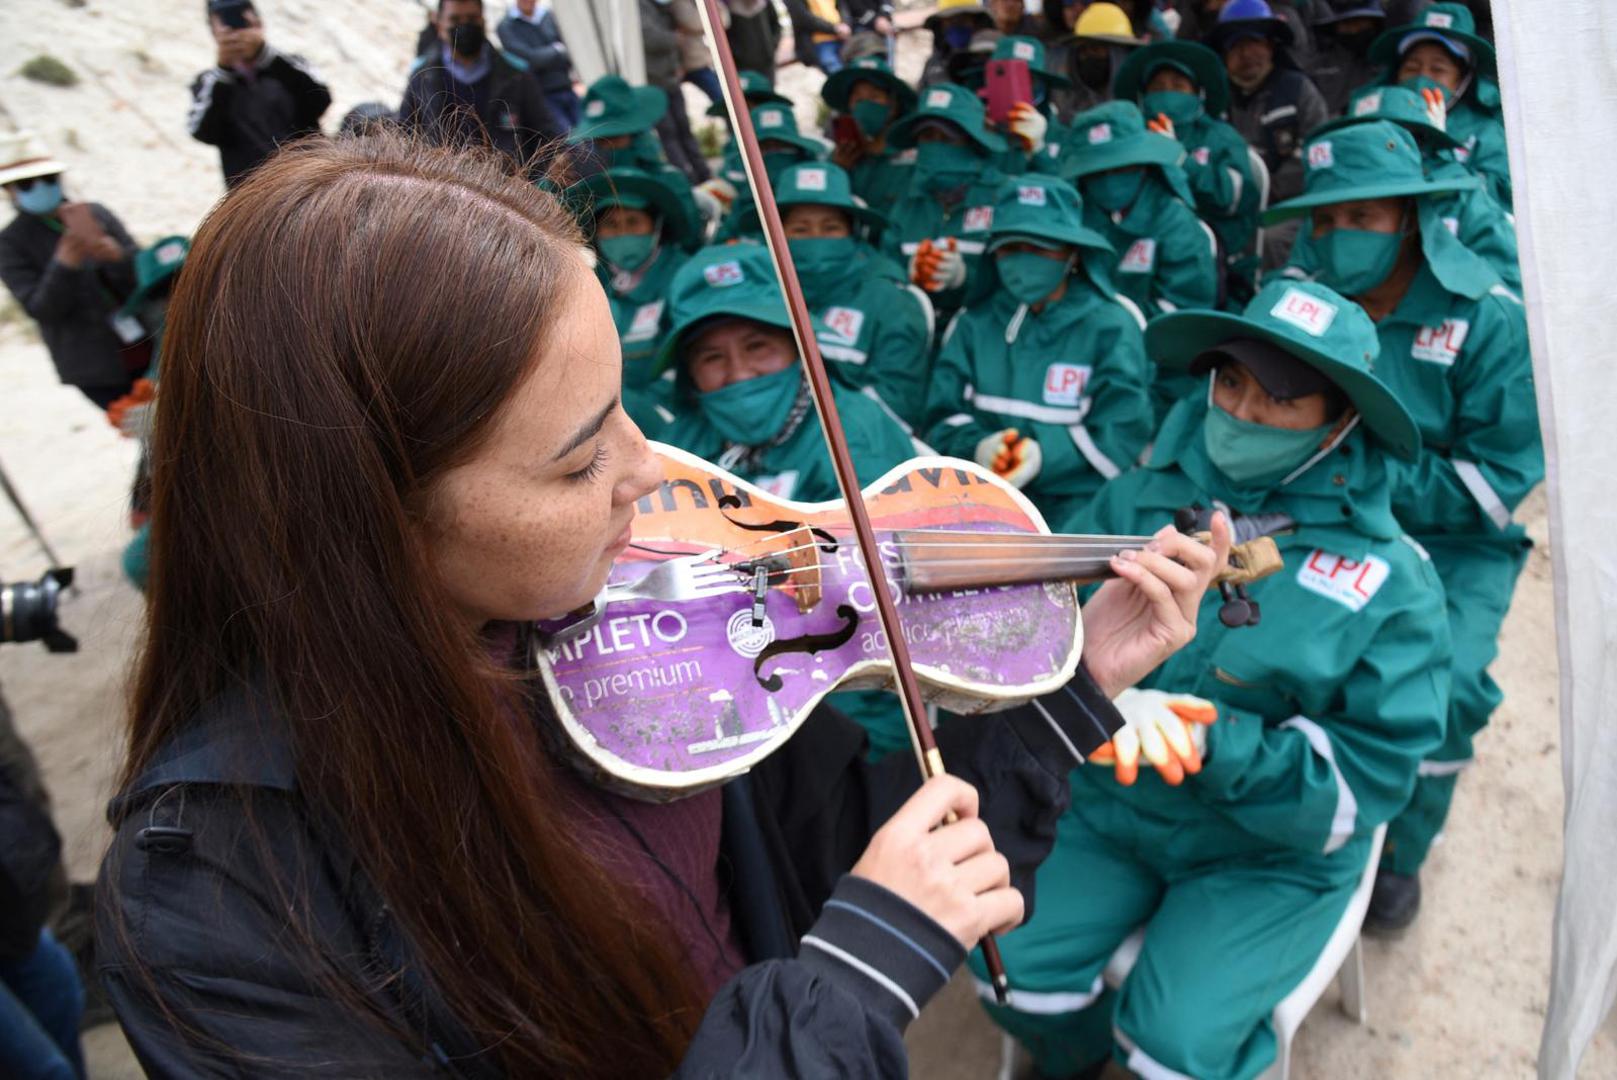 Cinthia Servin,  a musician with Paraguay's Cateura Recycled Instruments Orchestra, plays a violin made with recycled materials at the viewpoint of the Sak'a Churu sanitary landfill in Alpacoma, in La Paz, Bolivia February 27, 2023. REUTERS/Claudia Morales Photo: CLAUDIA MORALES/REUTERS